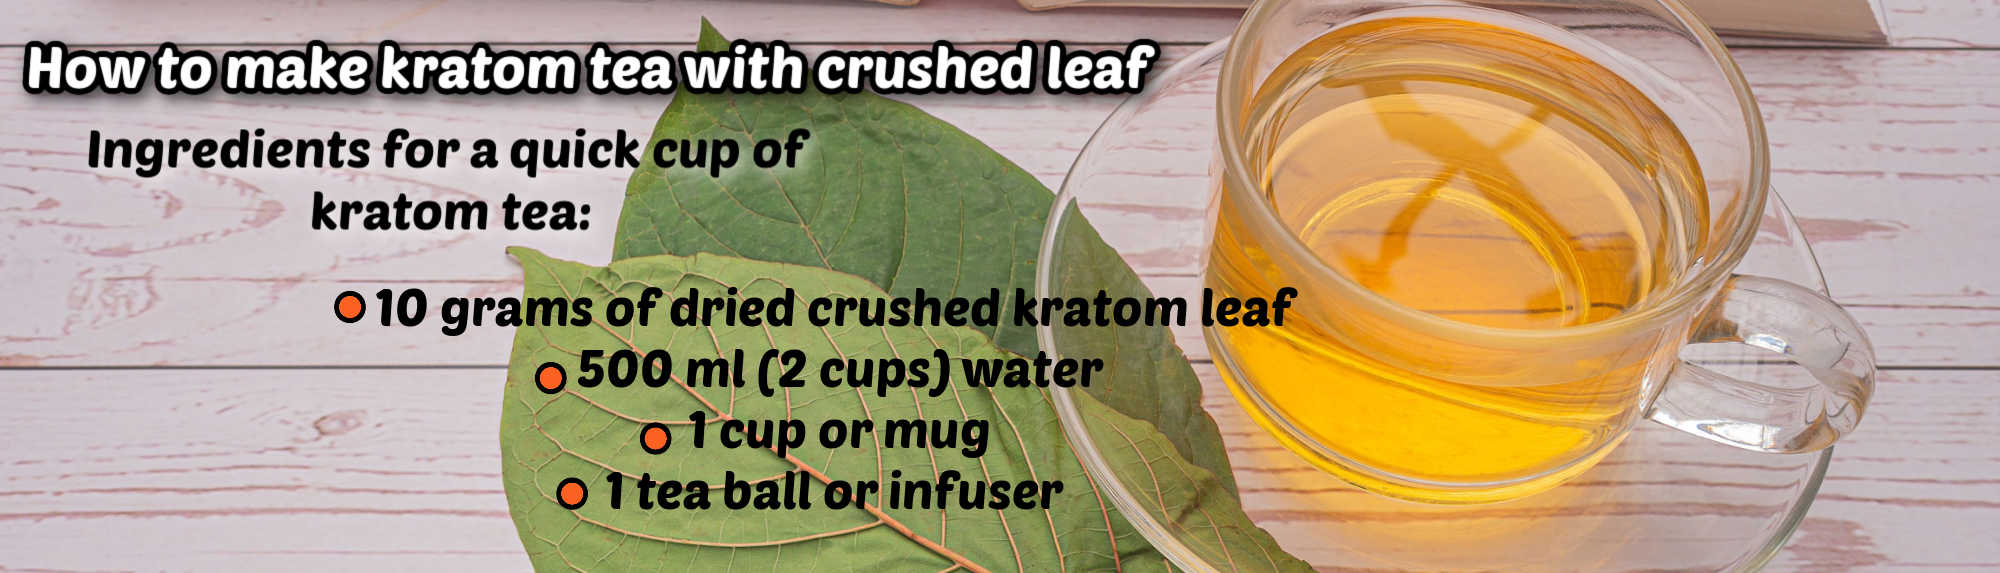 image of ingredients for a quick cup of kratom tea